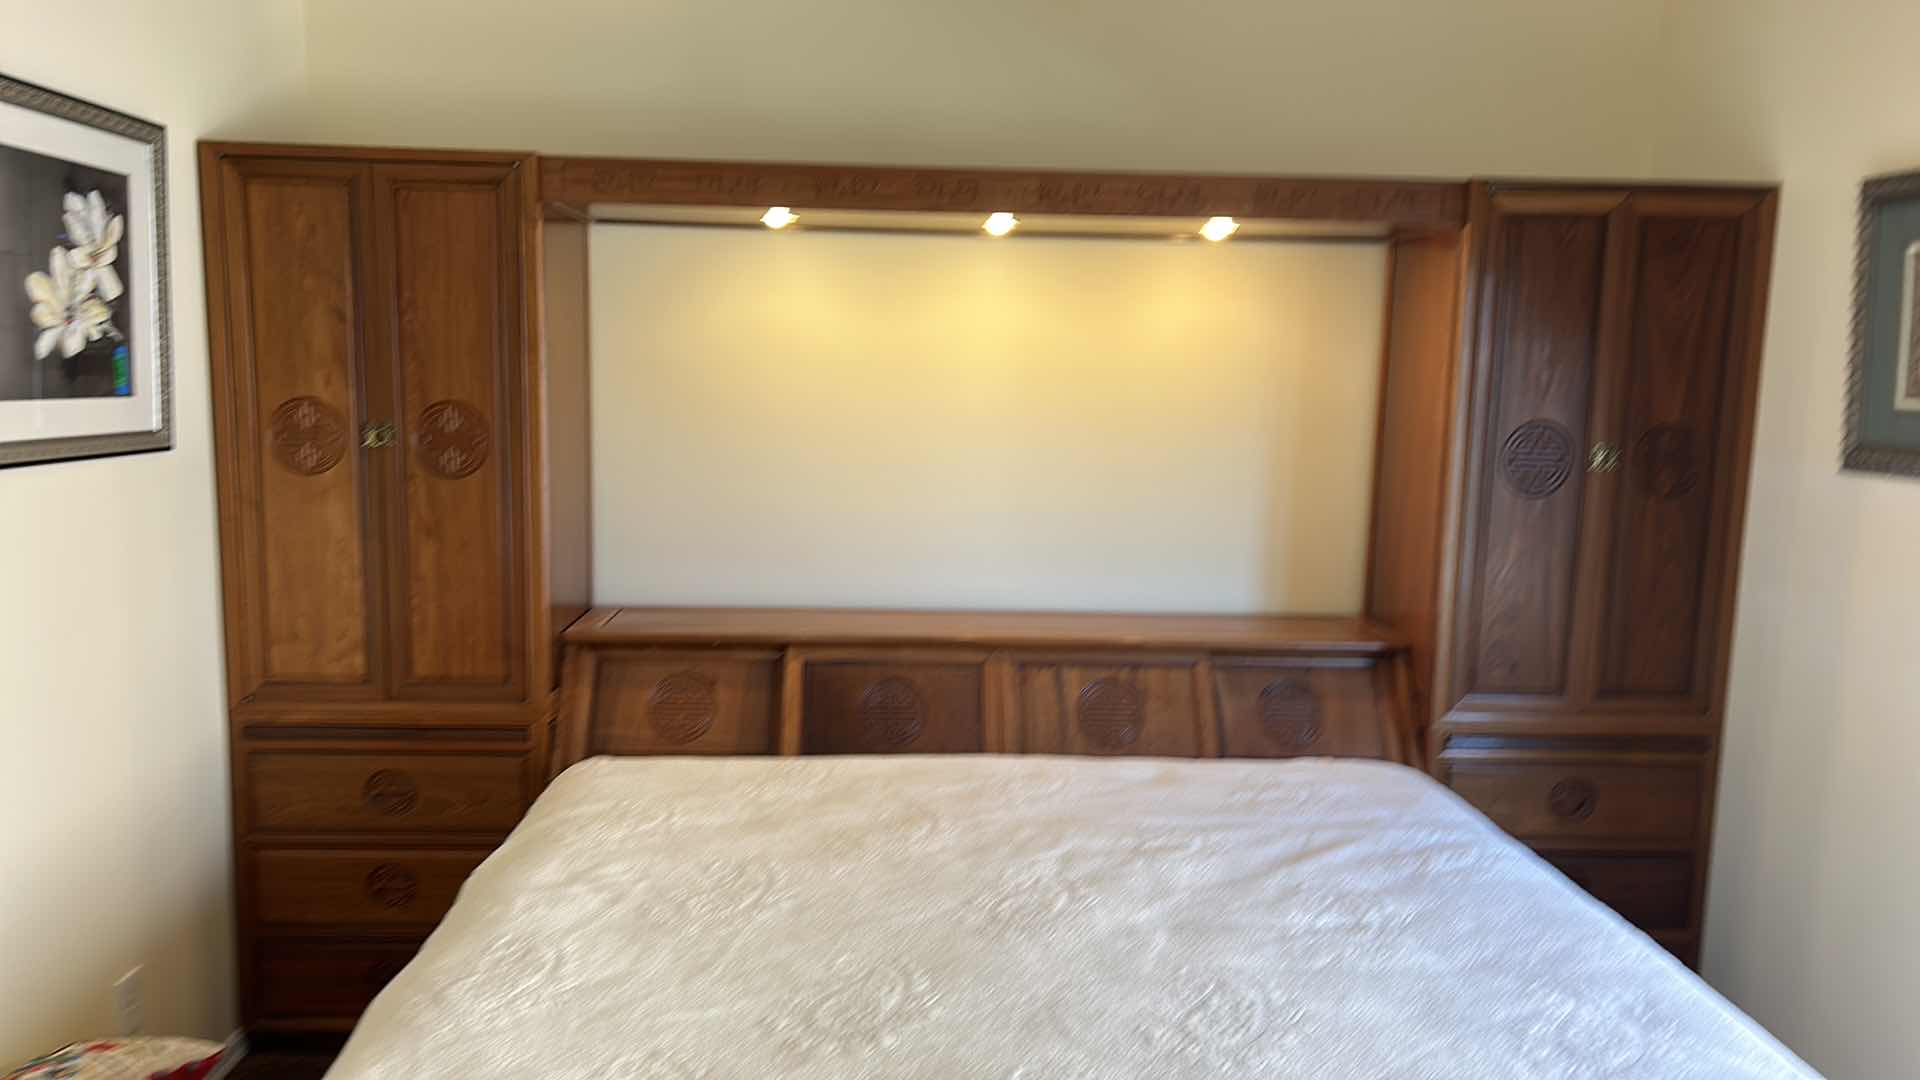 Photo 12 of ASIAN INSPIRED WOOD HEADBOARD AND WARDROBE 11’ x 20” x H 6’7” (MATTRESS SOLD SEPARATELY)